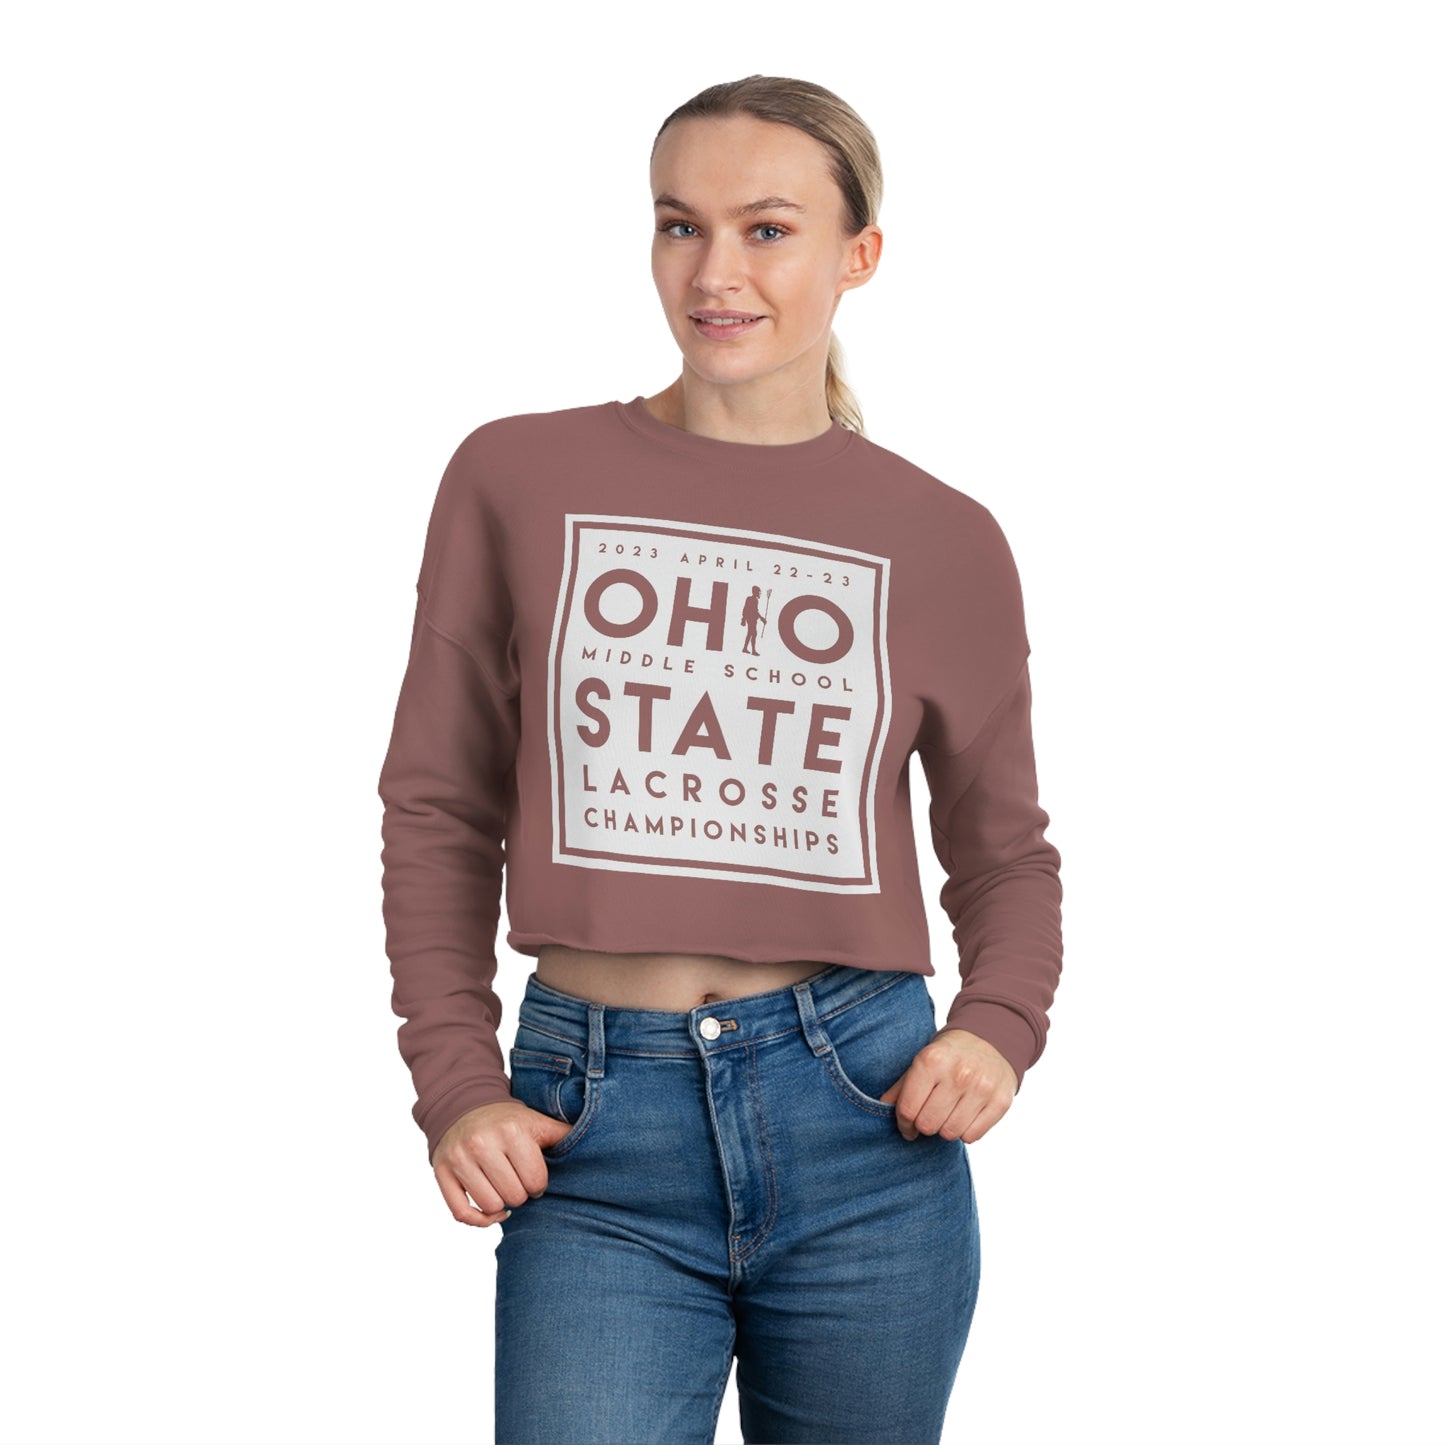 OHIO (PLAYER SUBSTITUTION) STATE LACROSSE CHAMPIONSHIPS-Women's Cropped Sweatshirt